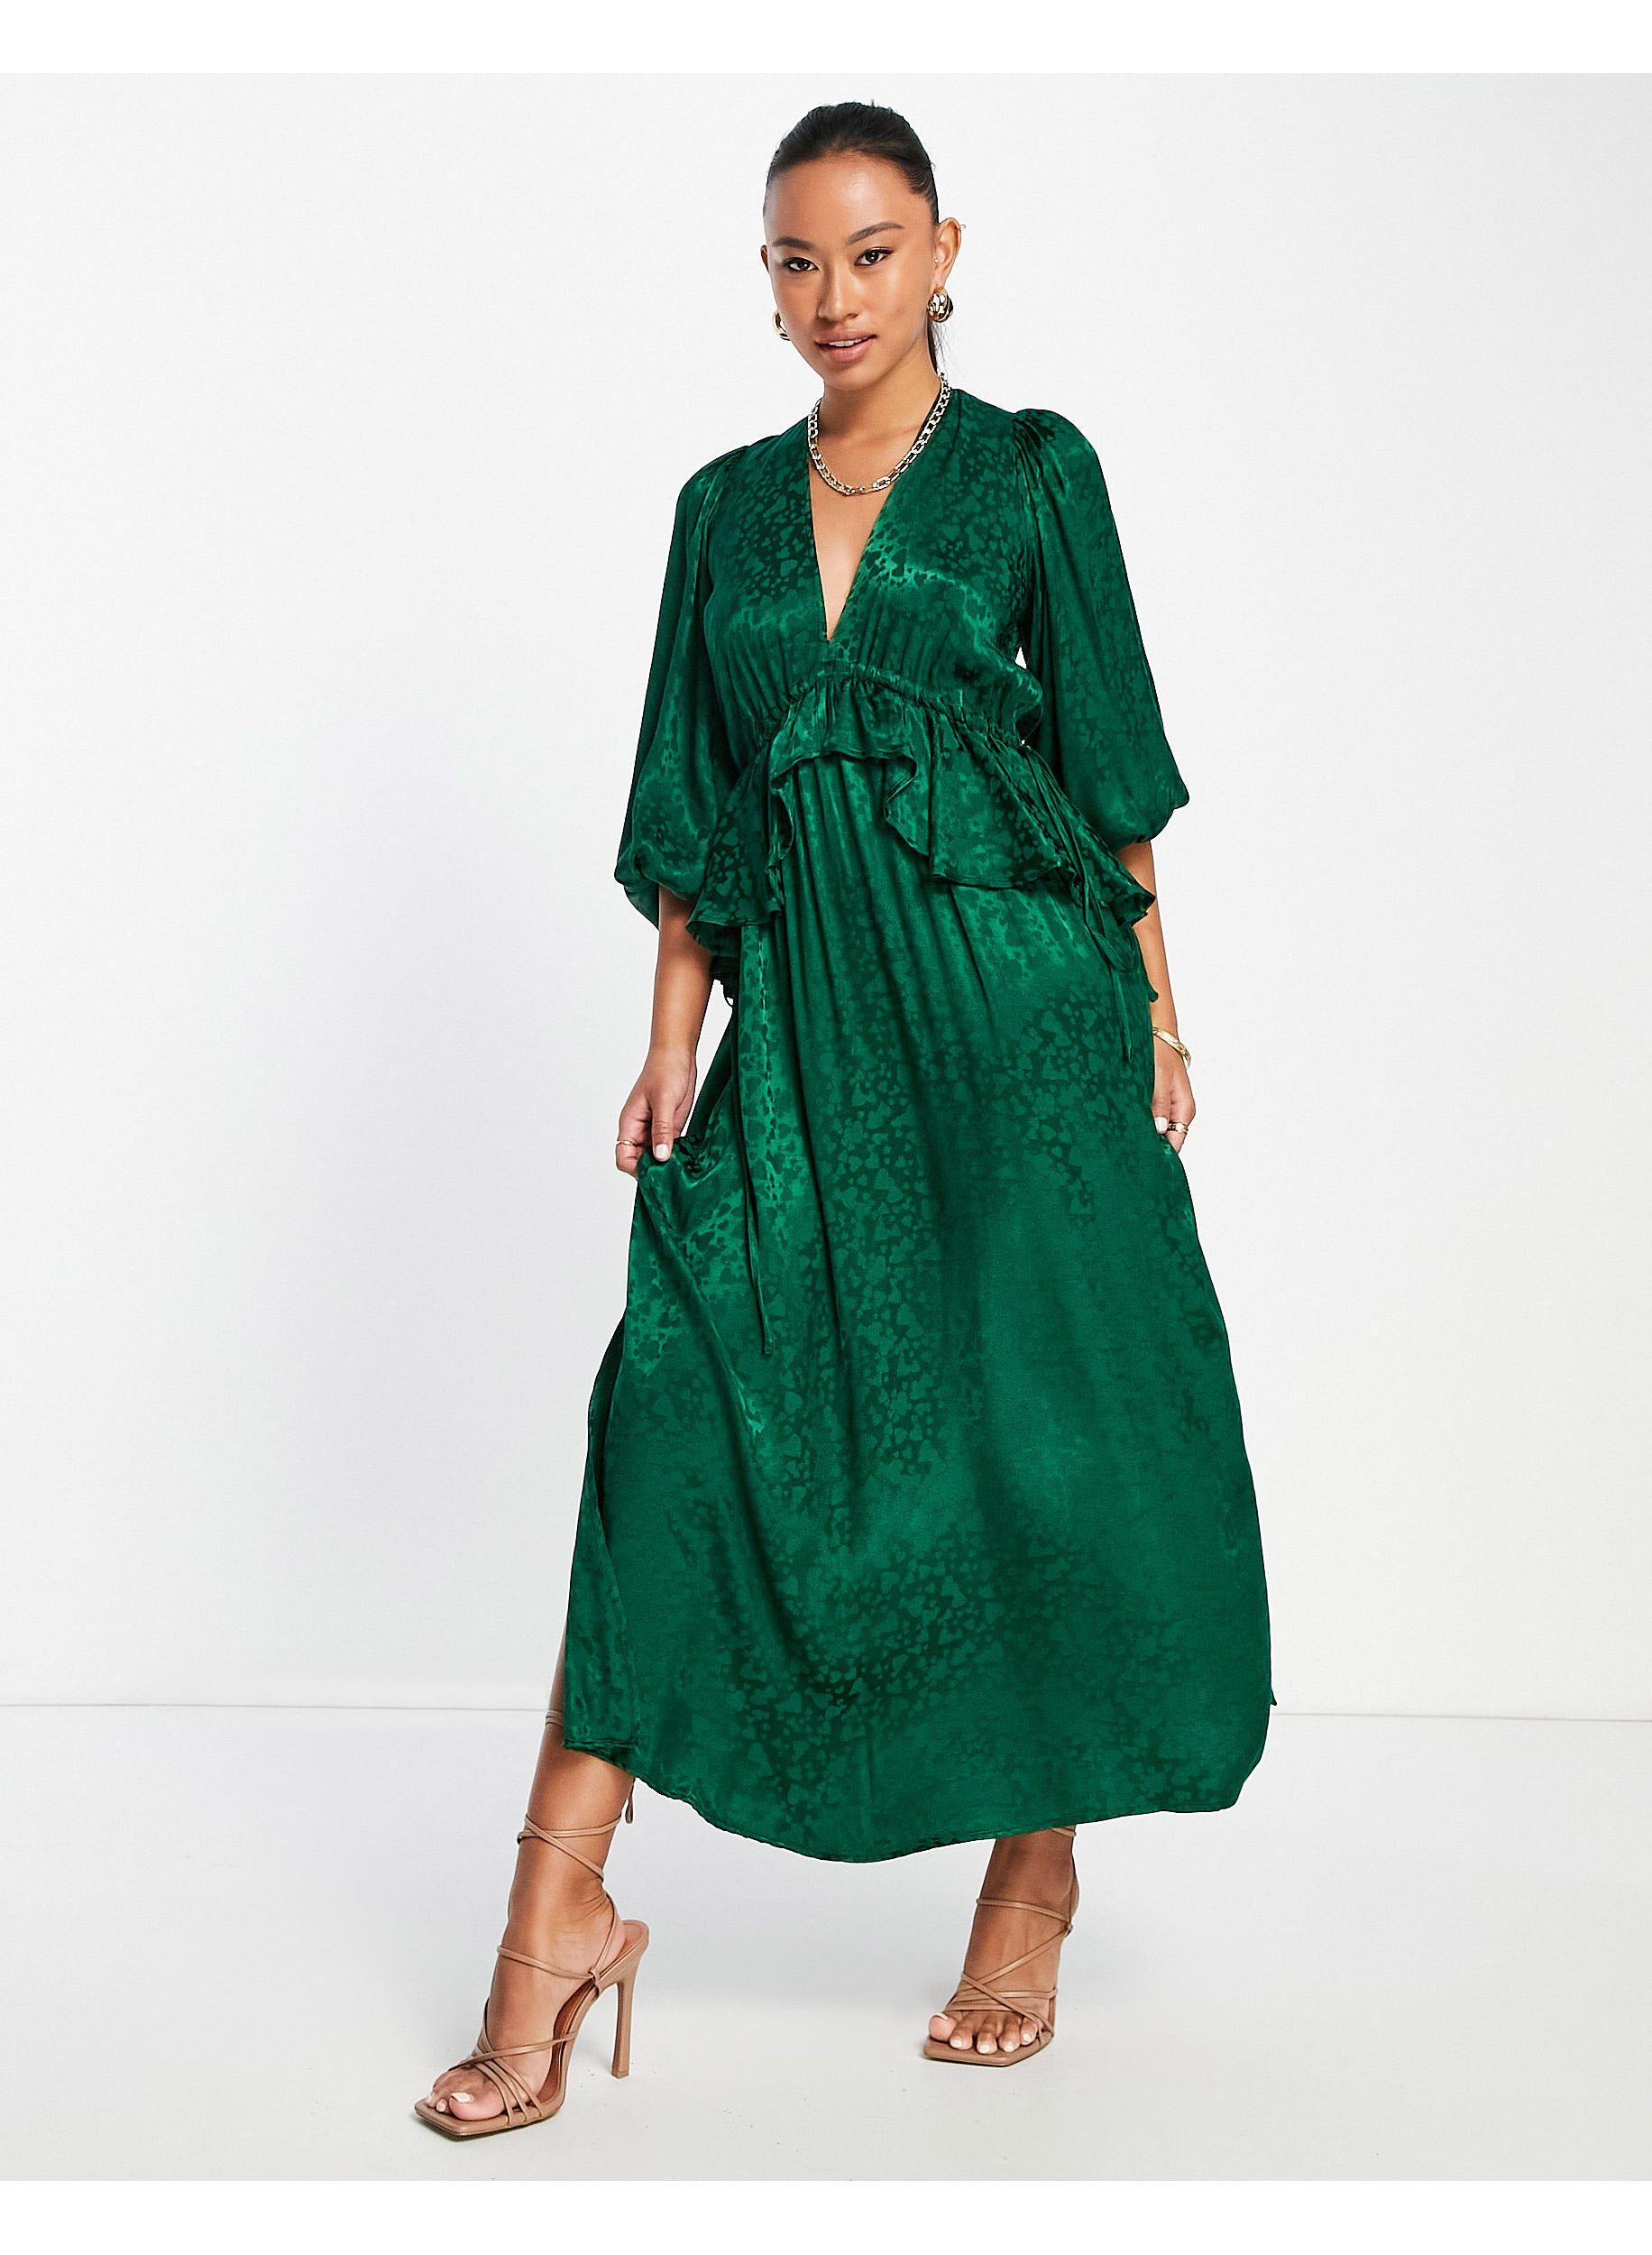 TOPSHOP Jacquard Riveria Occasion Dress in Green | Lyst